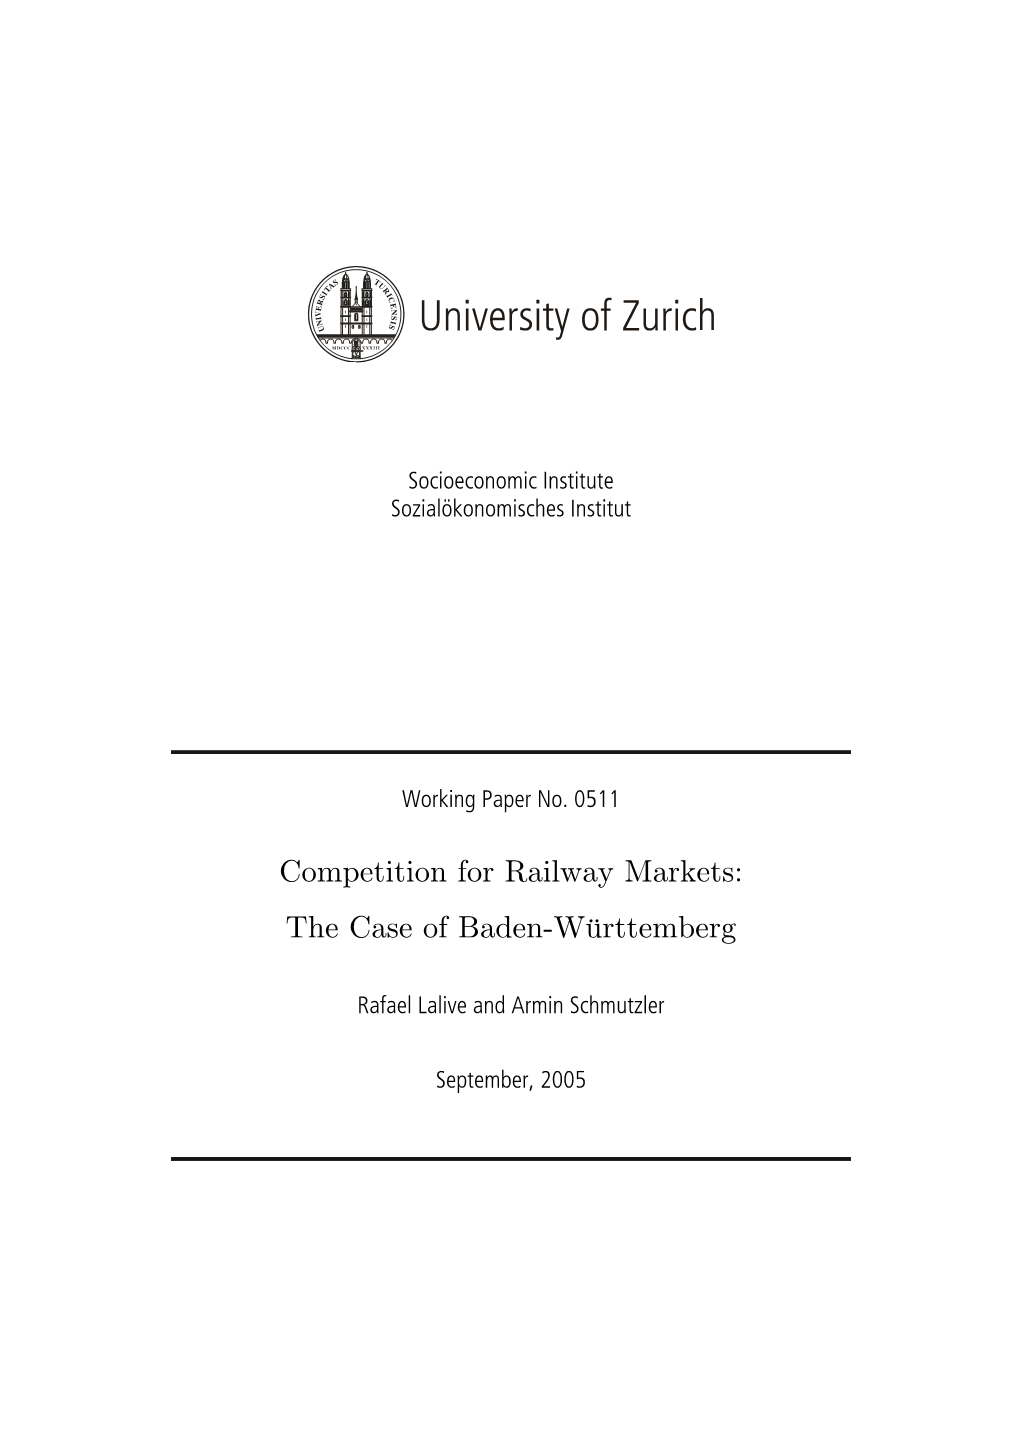 Competition for Railway Markets: the Case of Baden-Württemberg